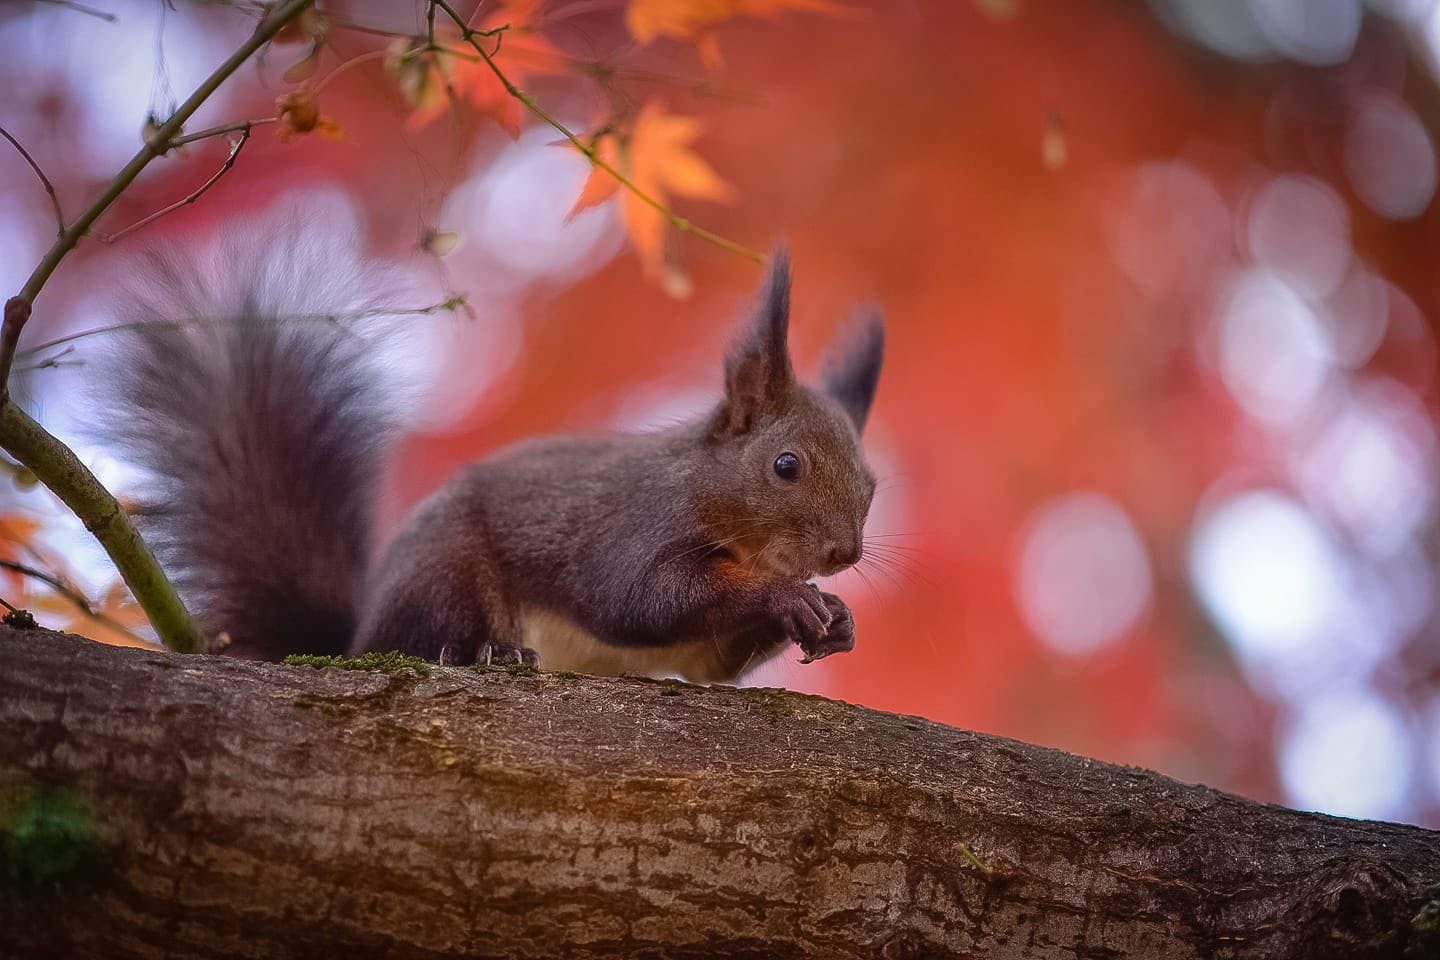 Explore Sofia's Park: Help a Lost Squirrel Find her Way Back Home image